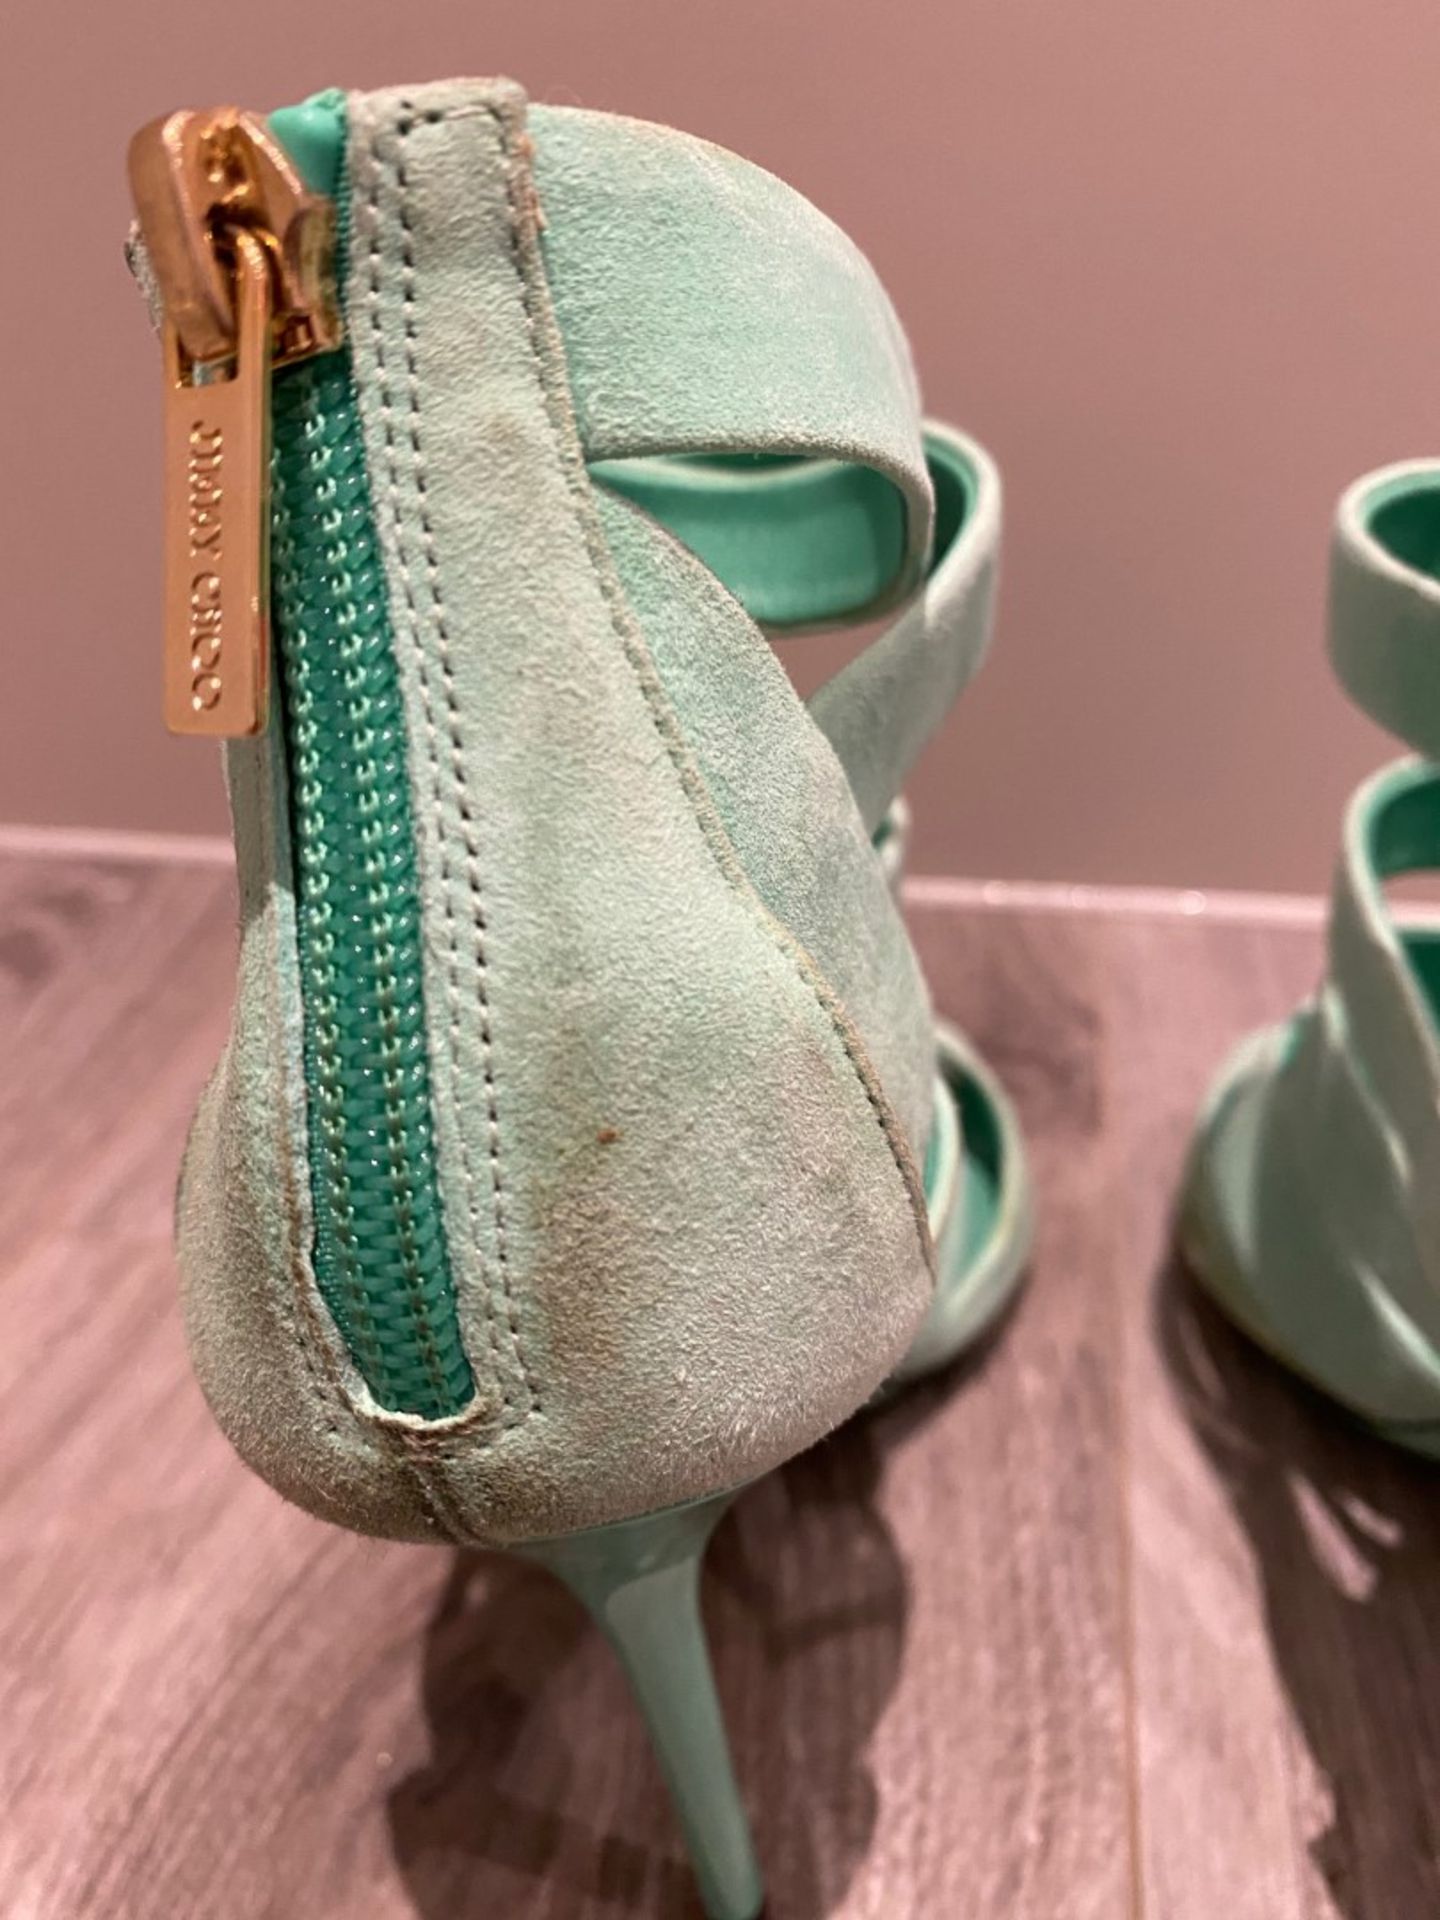 1 x Pair Of Genuine Jimmy Choo High Heel Shoes In Mint Green - Size: 36 - Preowned in Worn Condition - Image 5 of 6